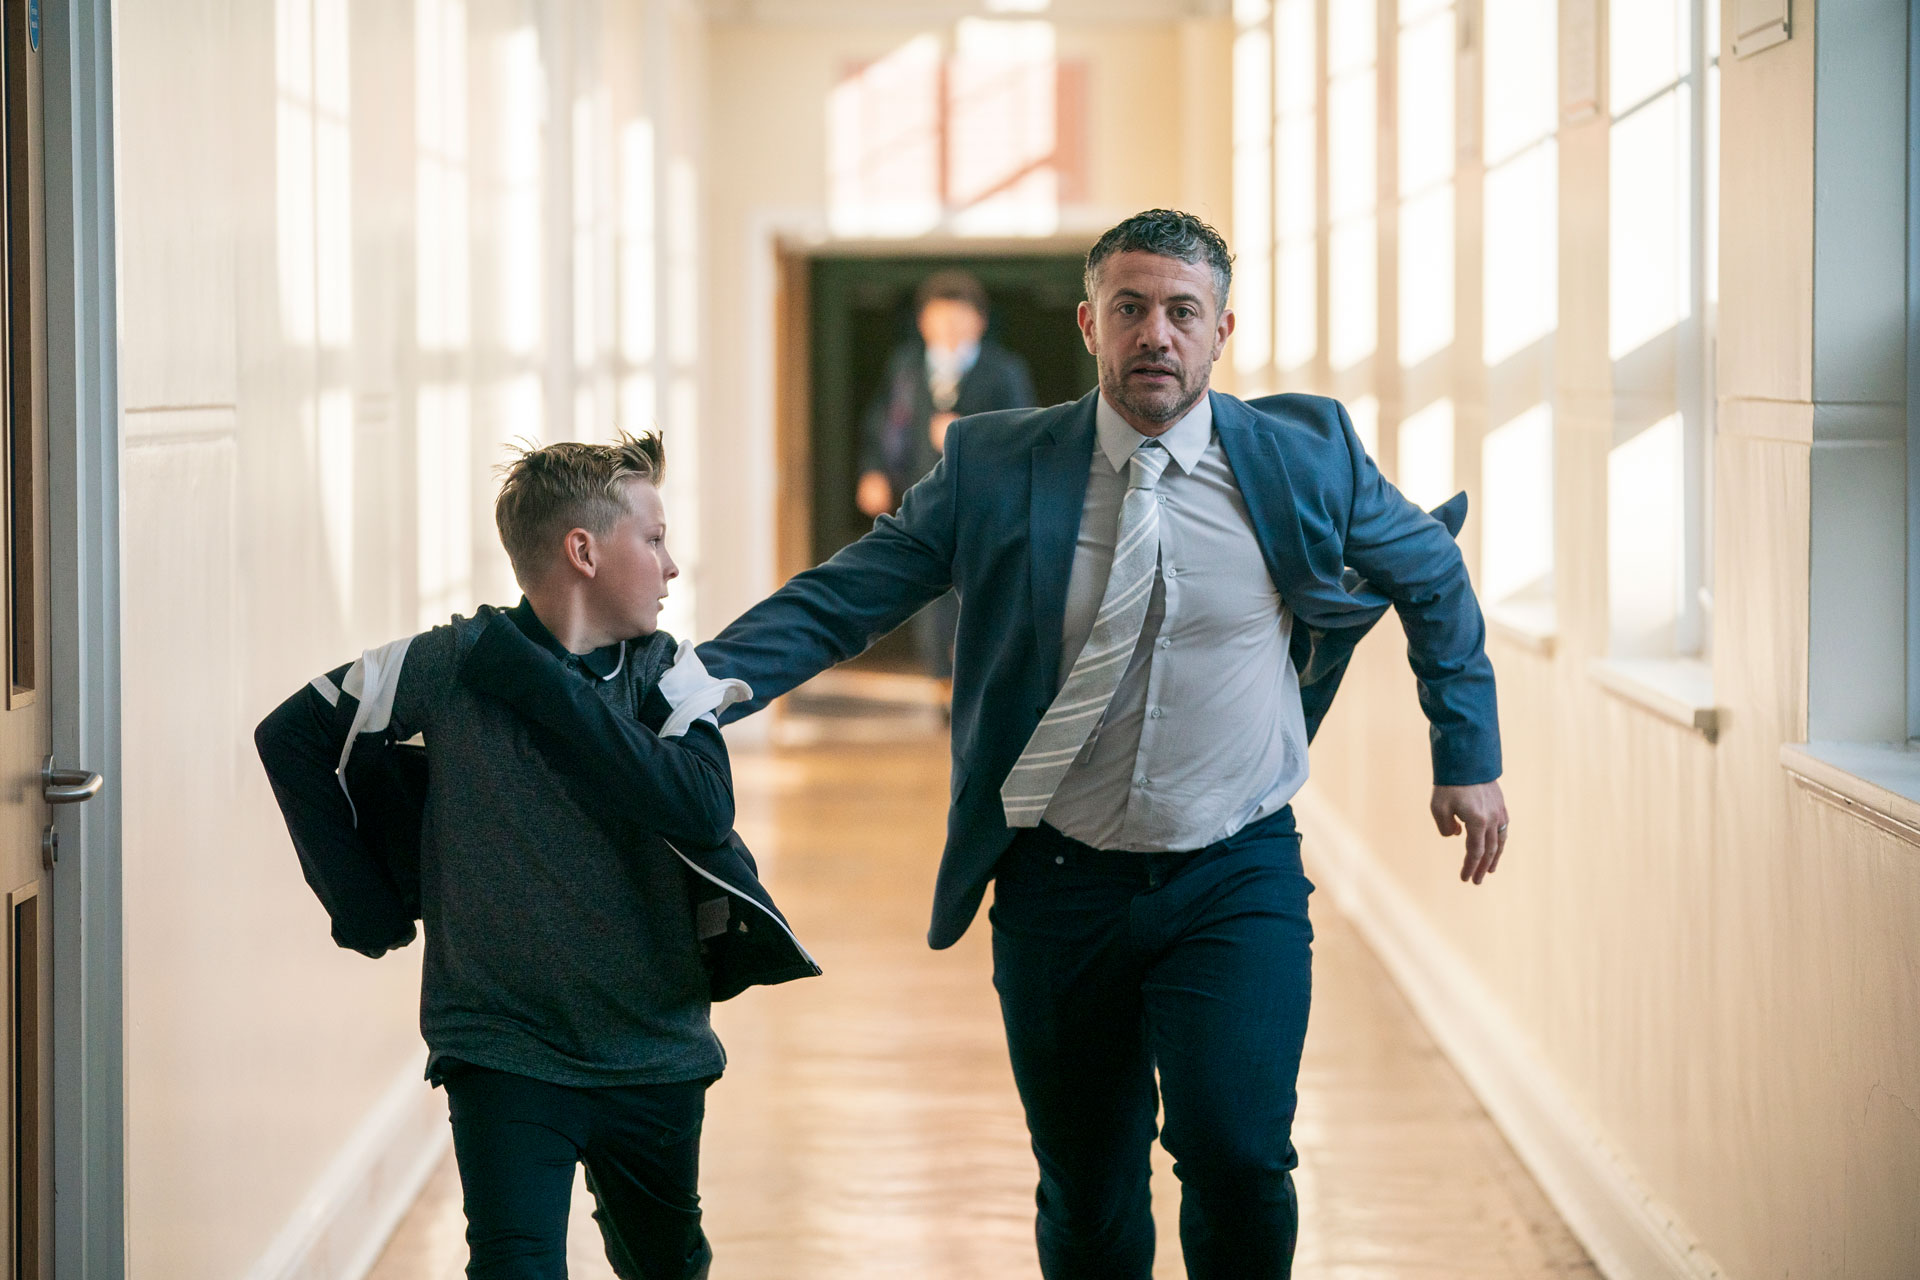 Student and teacher running down a school corridor in The Gathering